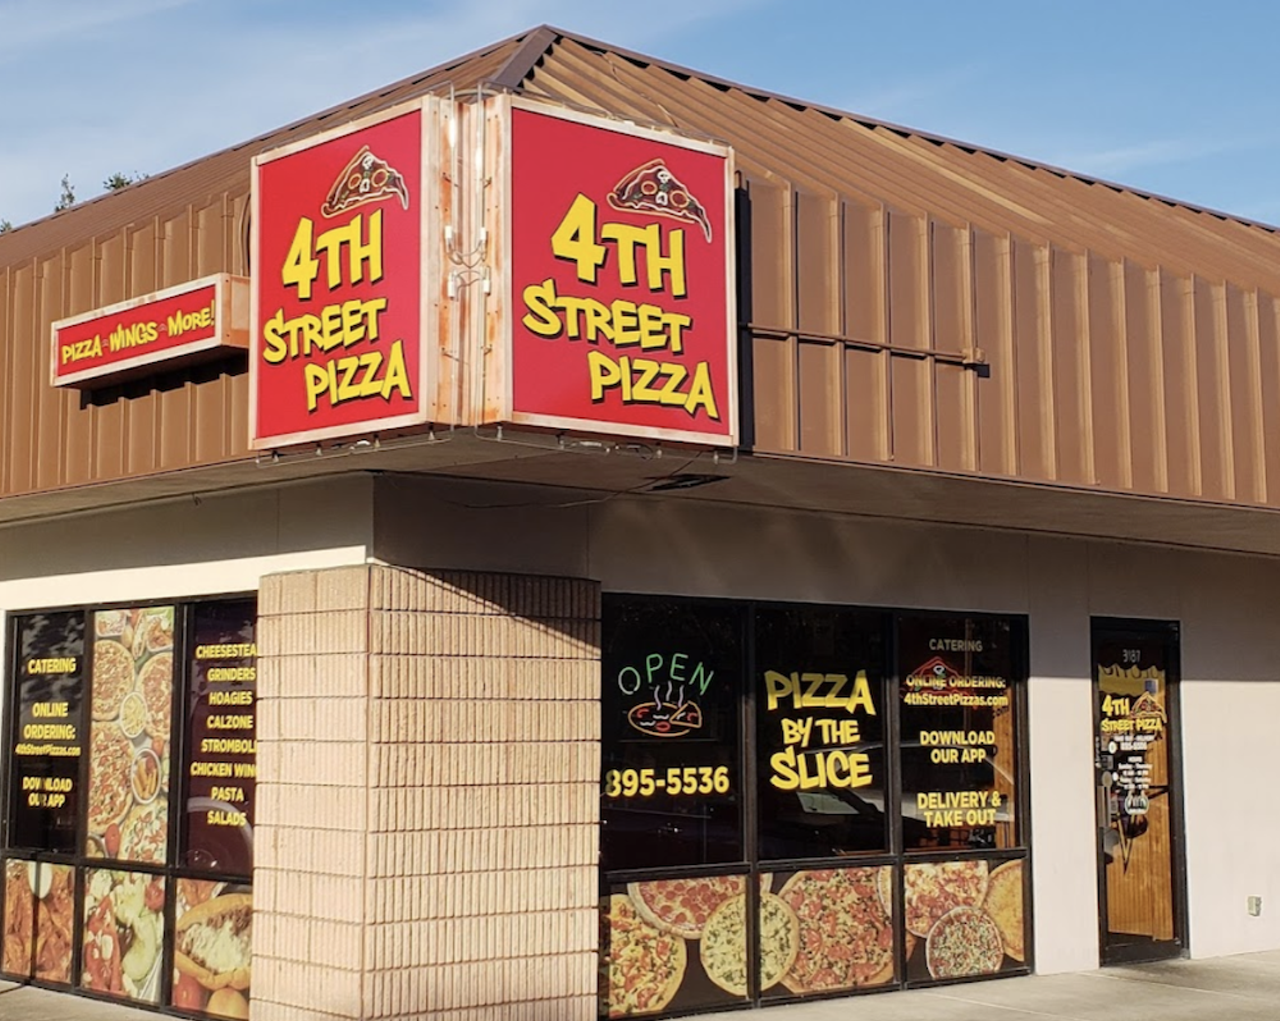 4th Street Pizza
3187 4th St. N, St. Petersburg, 727-895-8178
4th Street makes its dough and sauce fresh daily to ensure not a single slice lacks in quality. If pizza isn't your thing, grab a cheesesteak or a chicken parm. 
Photo via Google Maps